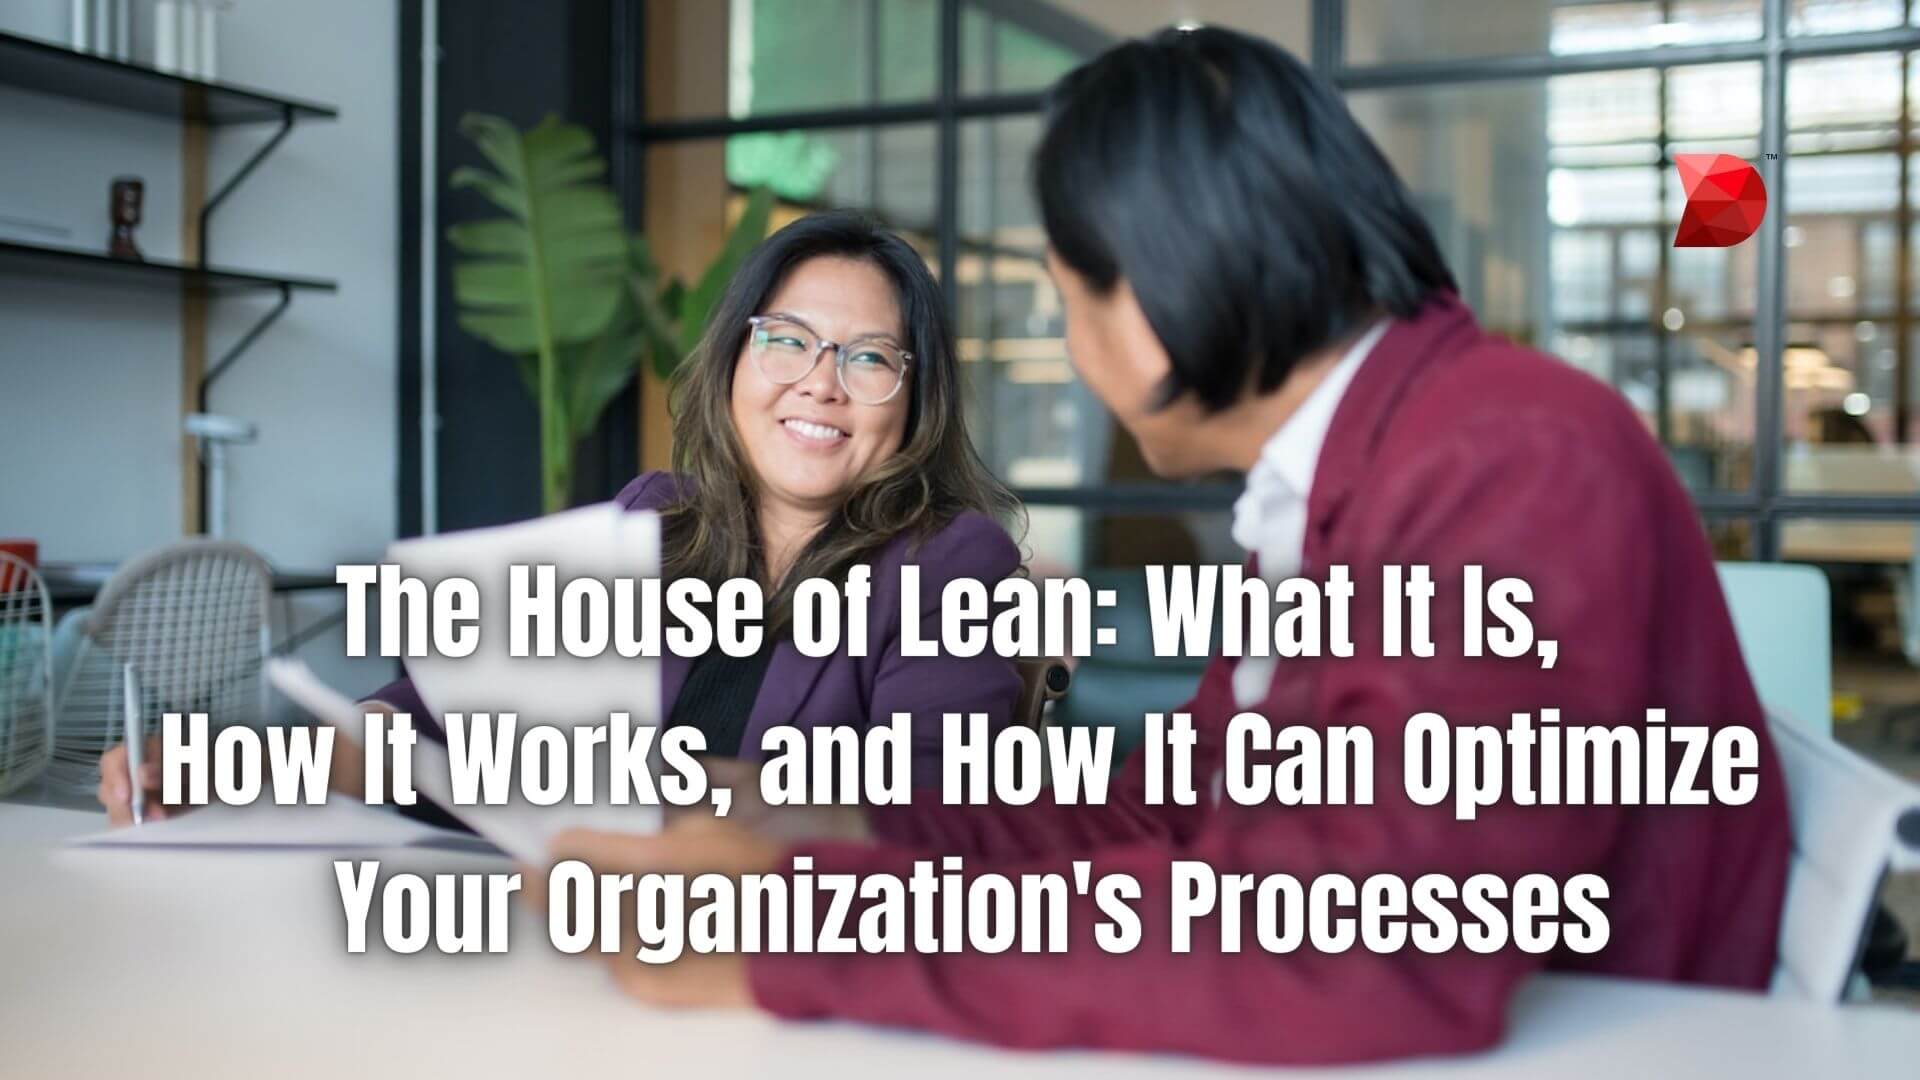 The House of Lean What It Is, How It Works, and How It Can Optimize Your Organization's Processes